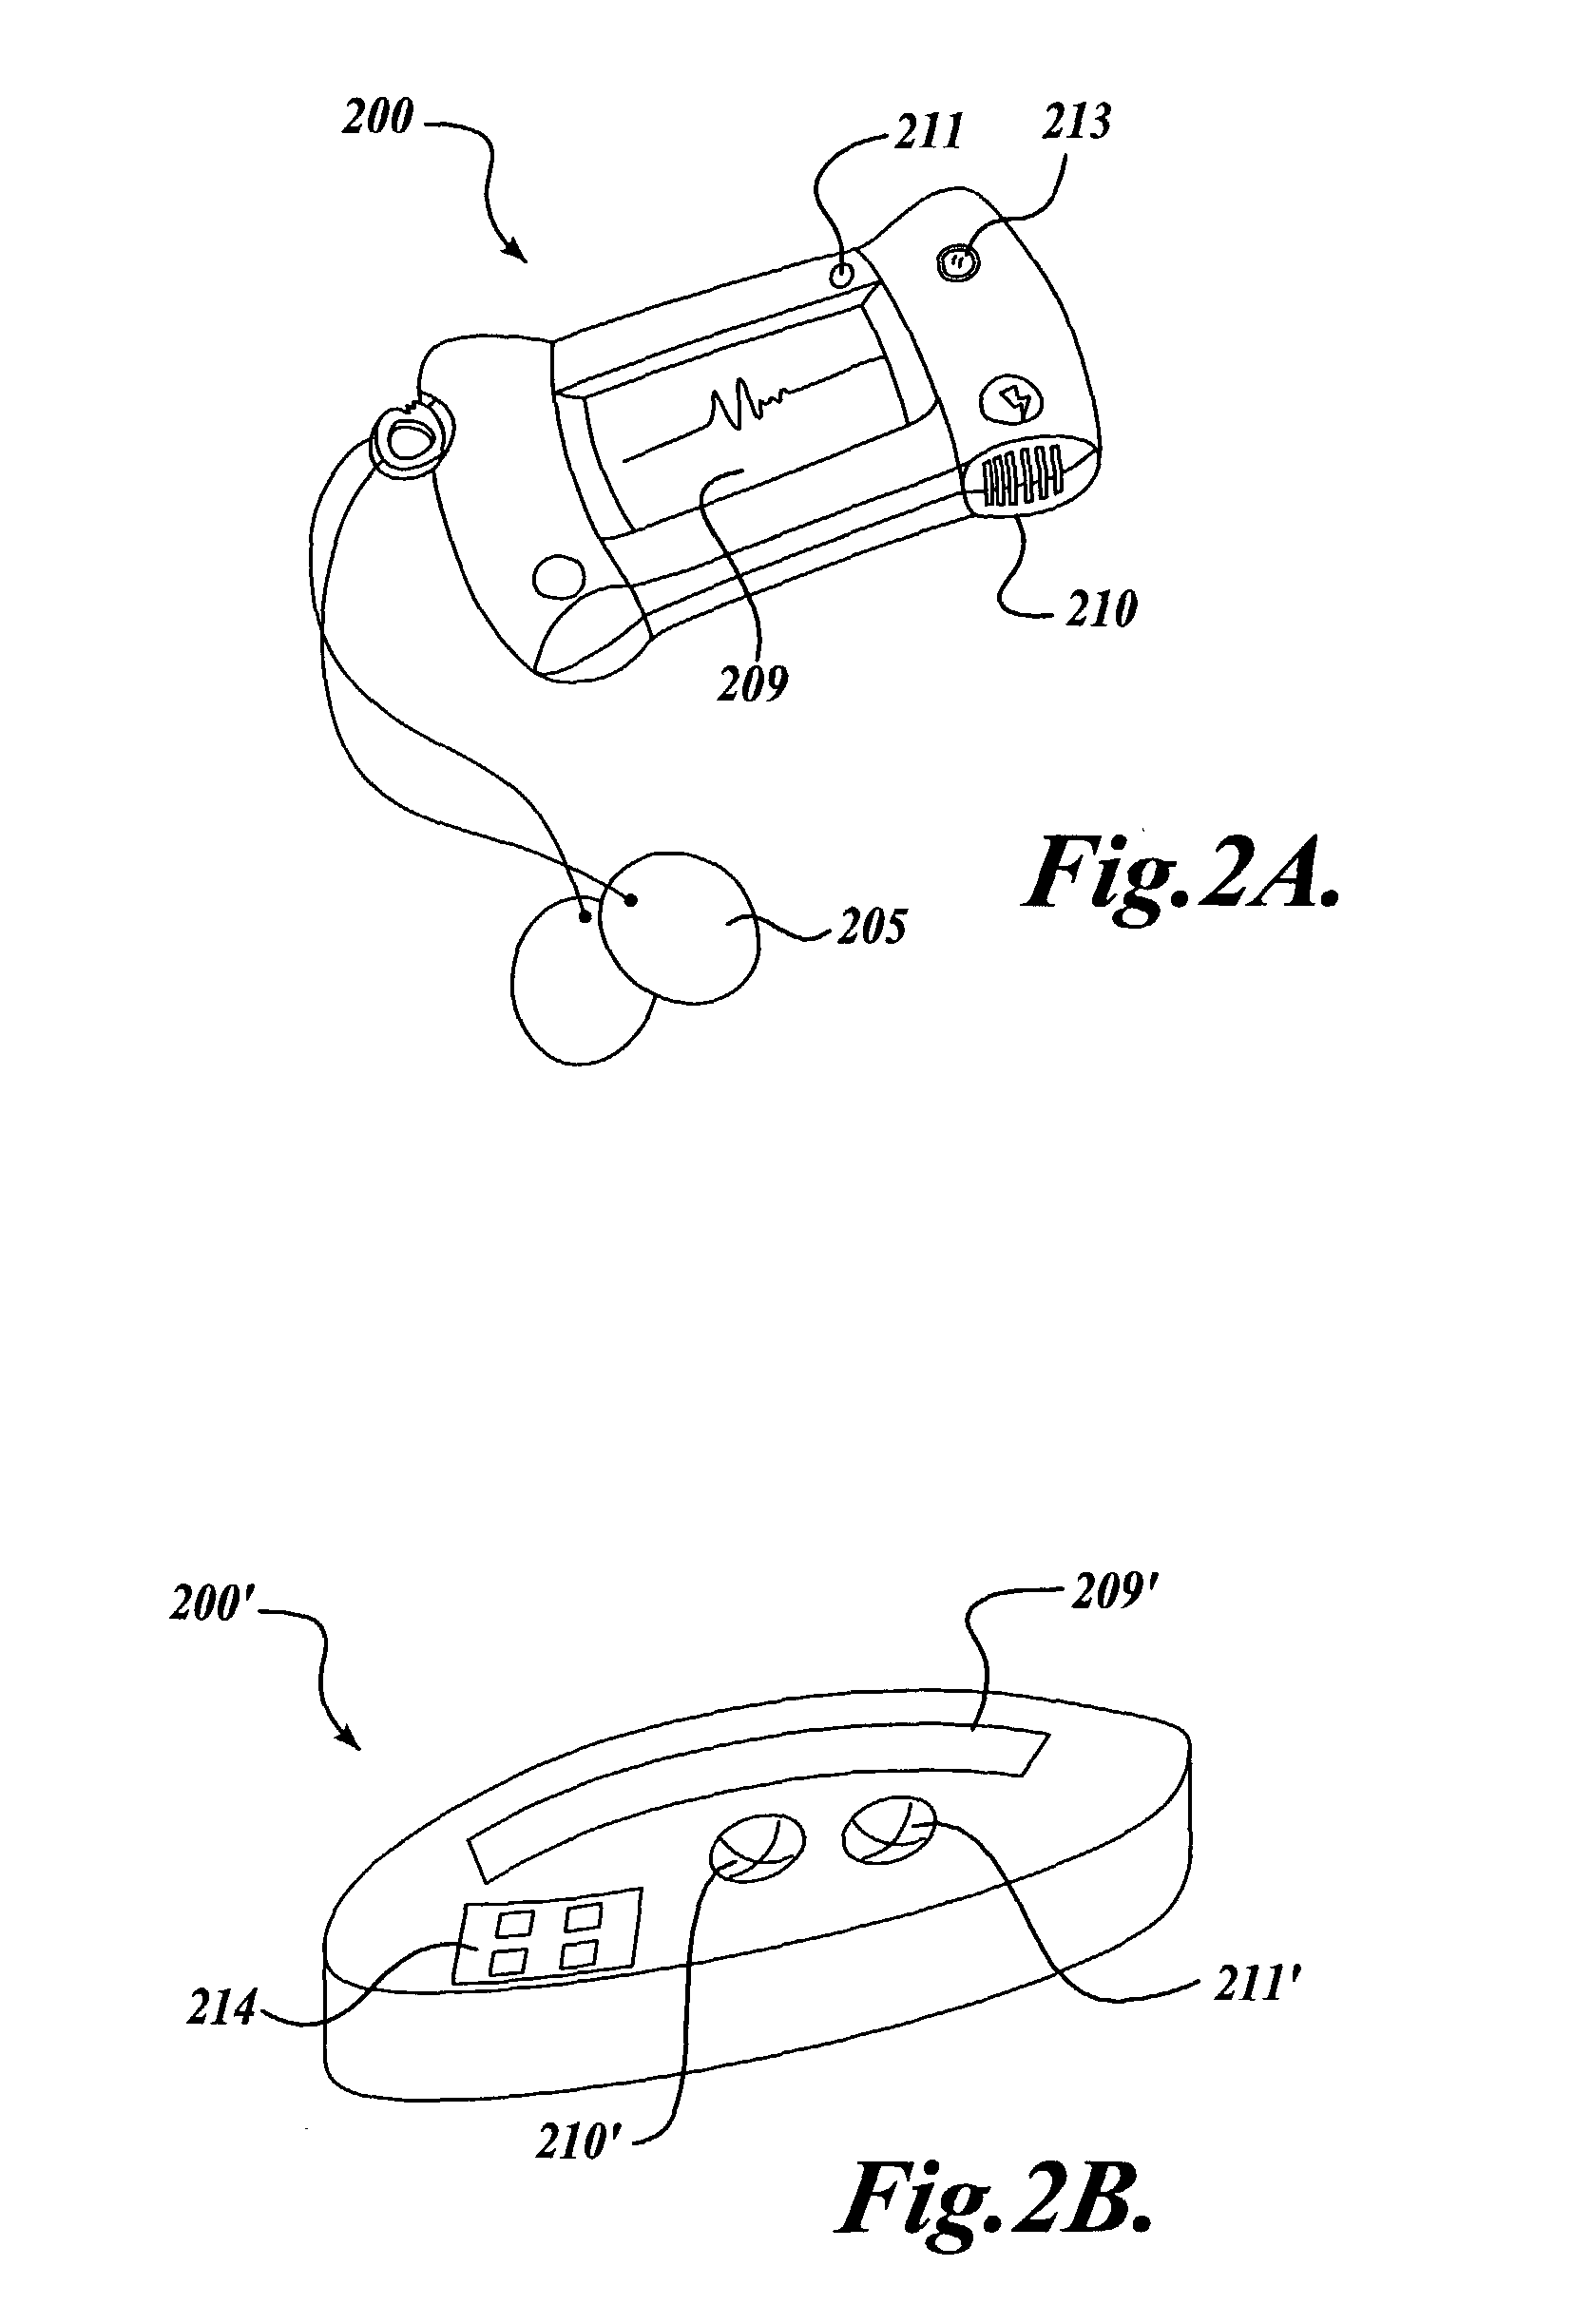 Therapy-delivering portable medical device capable of triggering and communicating with an alarm system